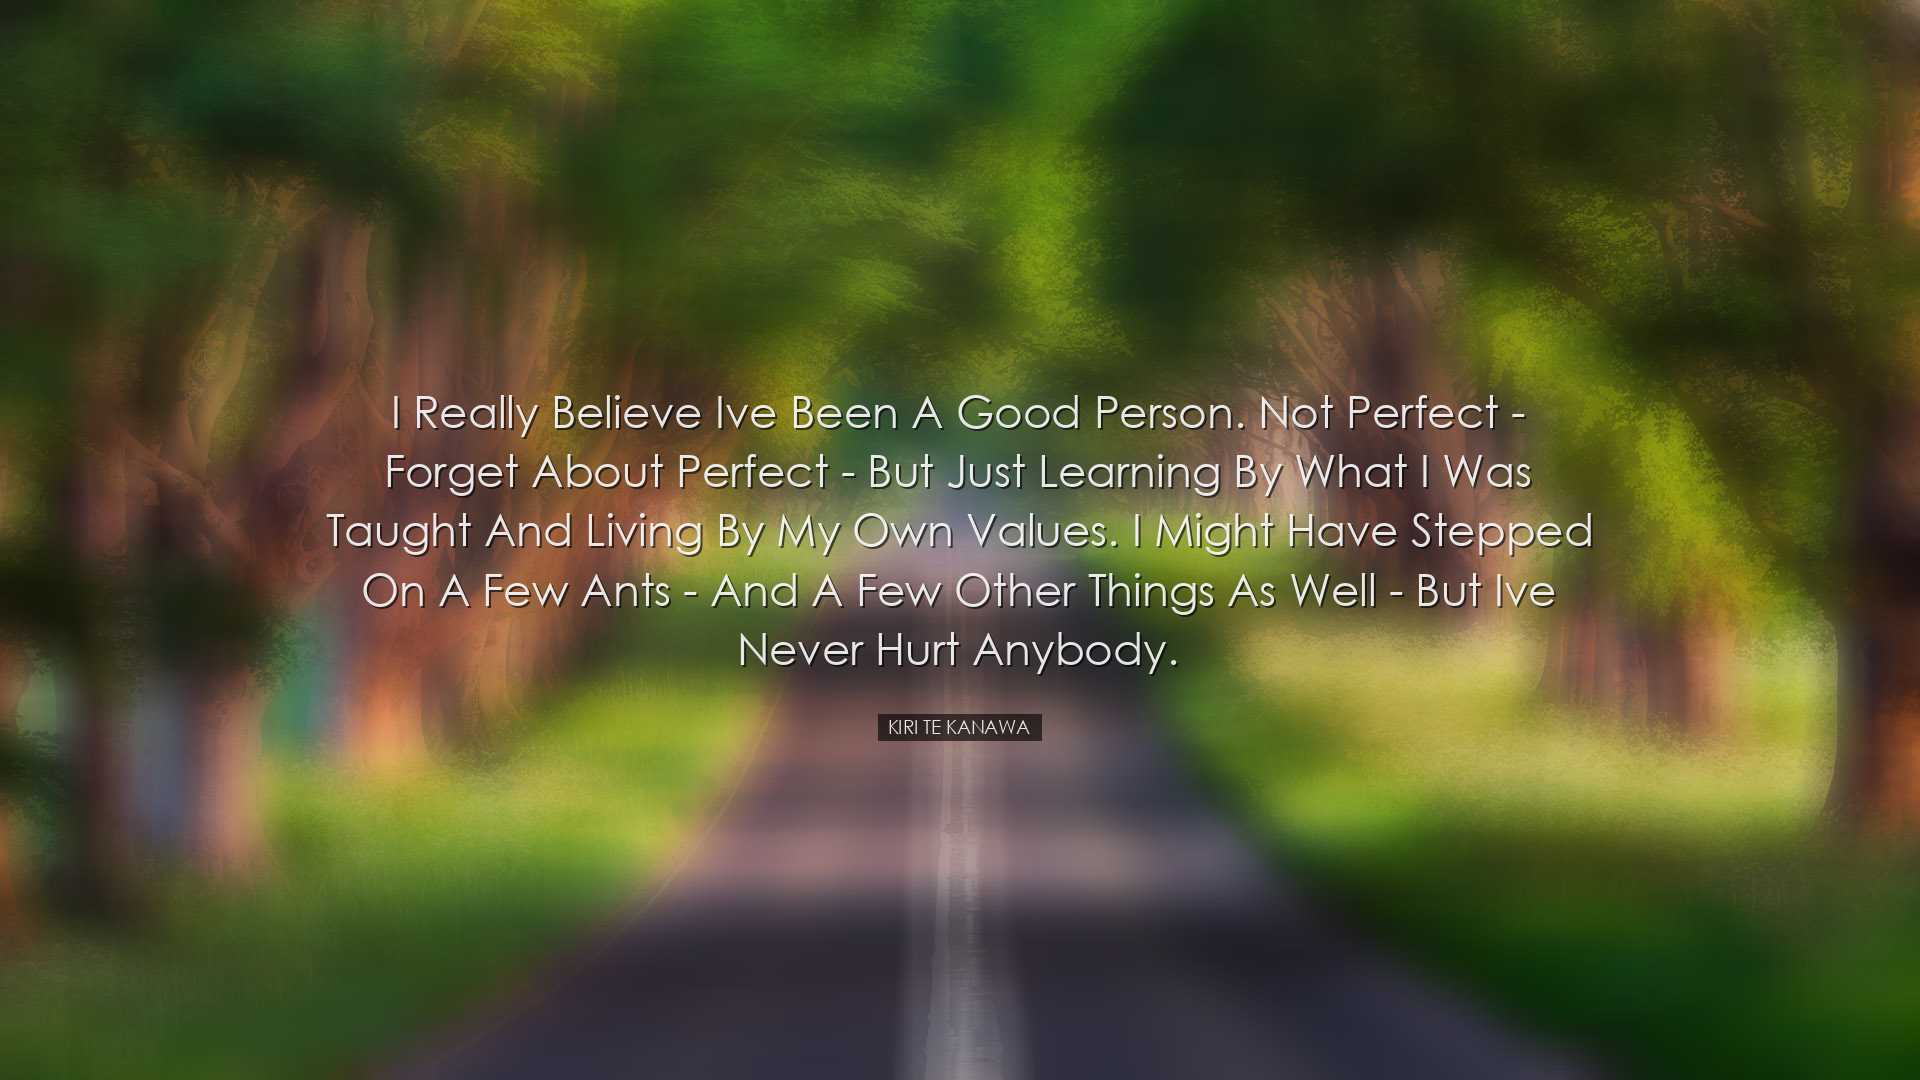 I really believe Ive been a good person. Not perfect - forget abou